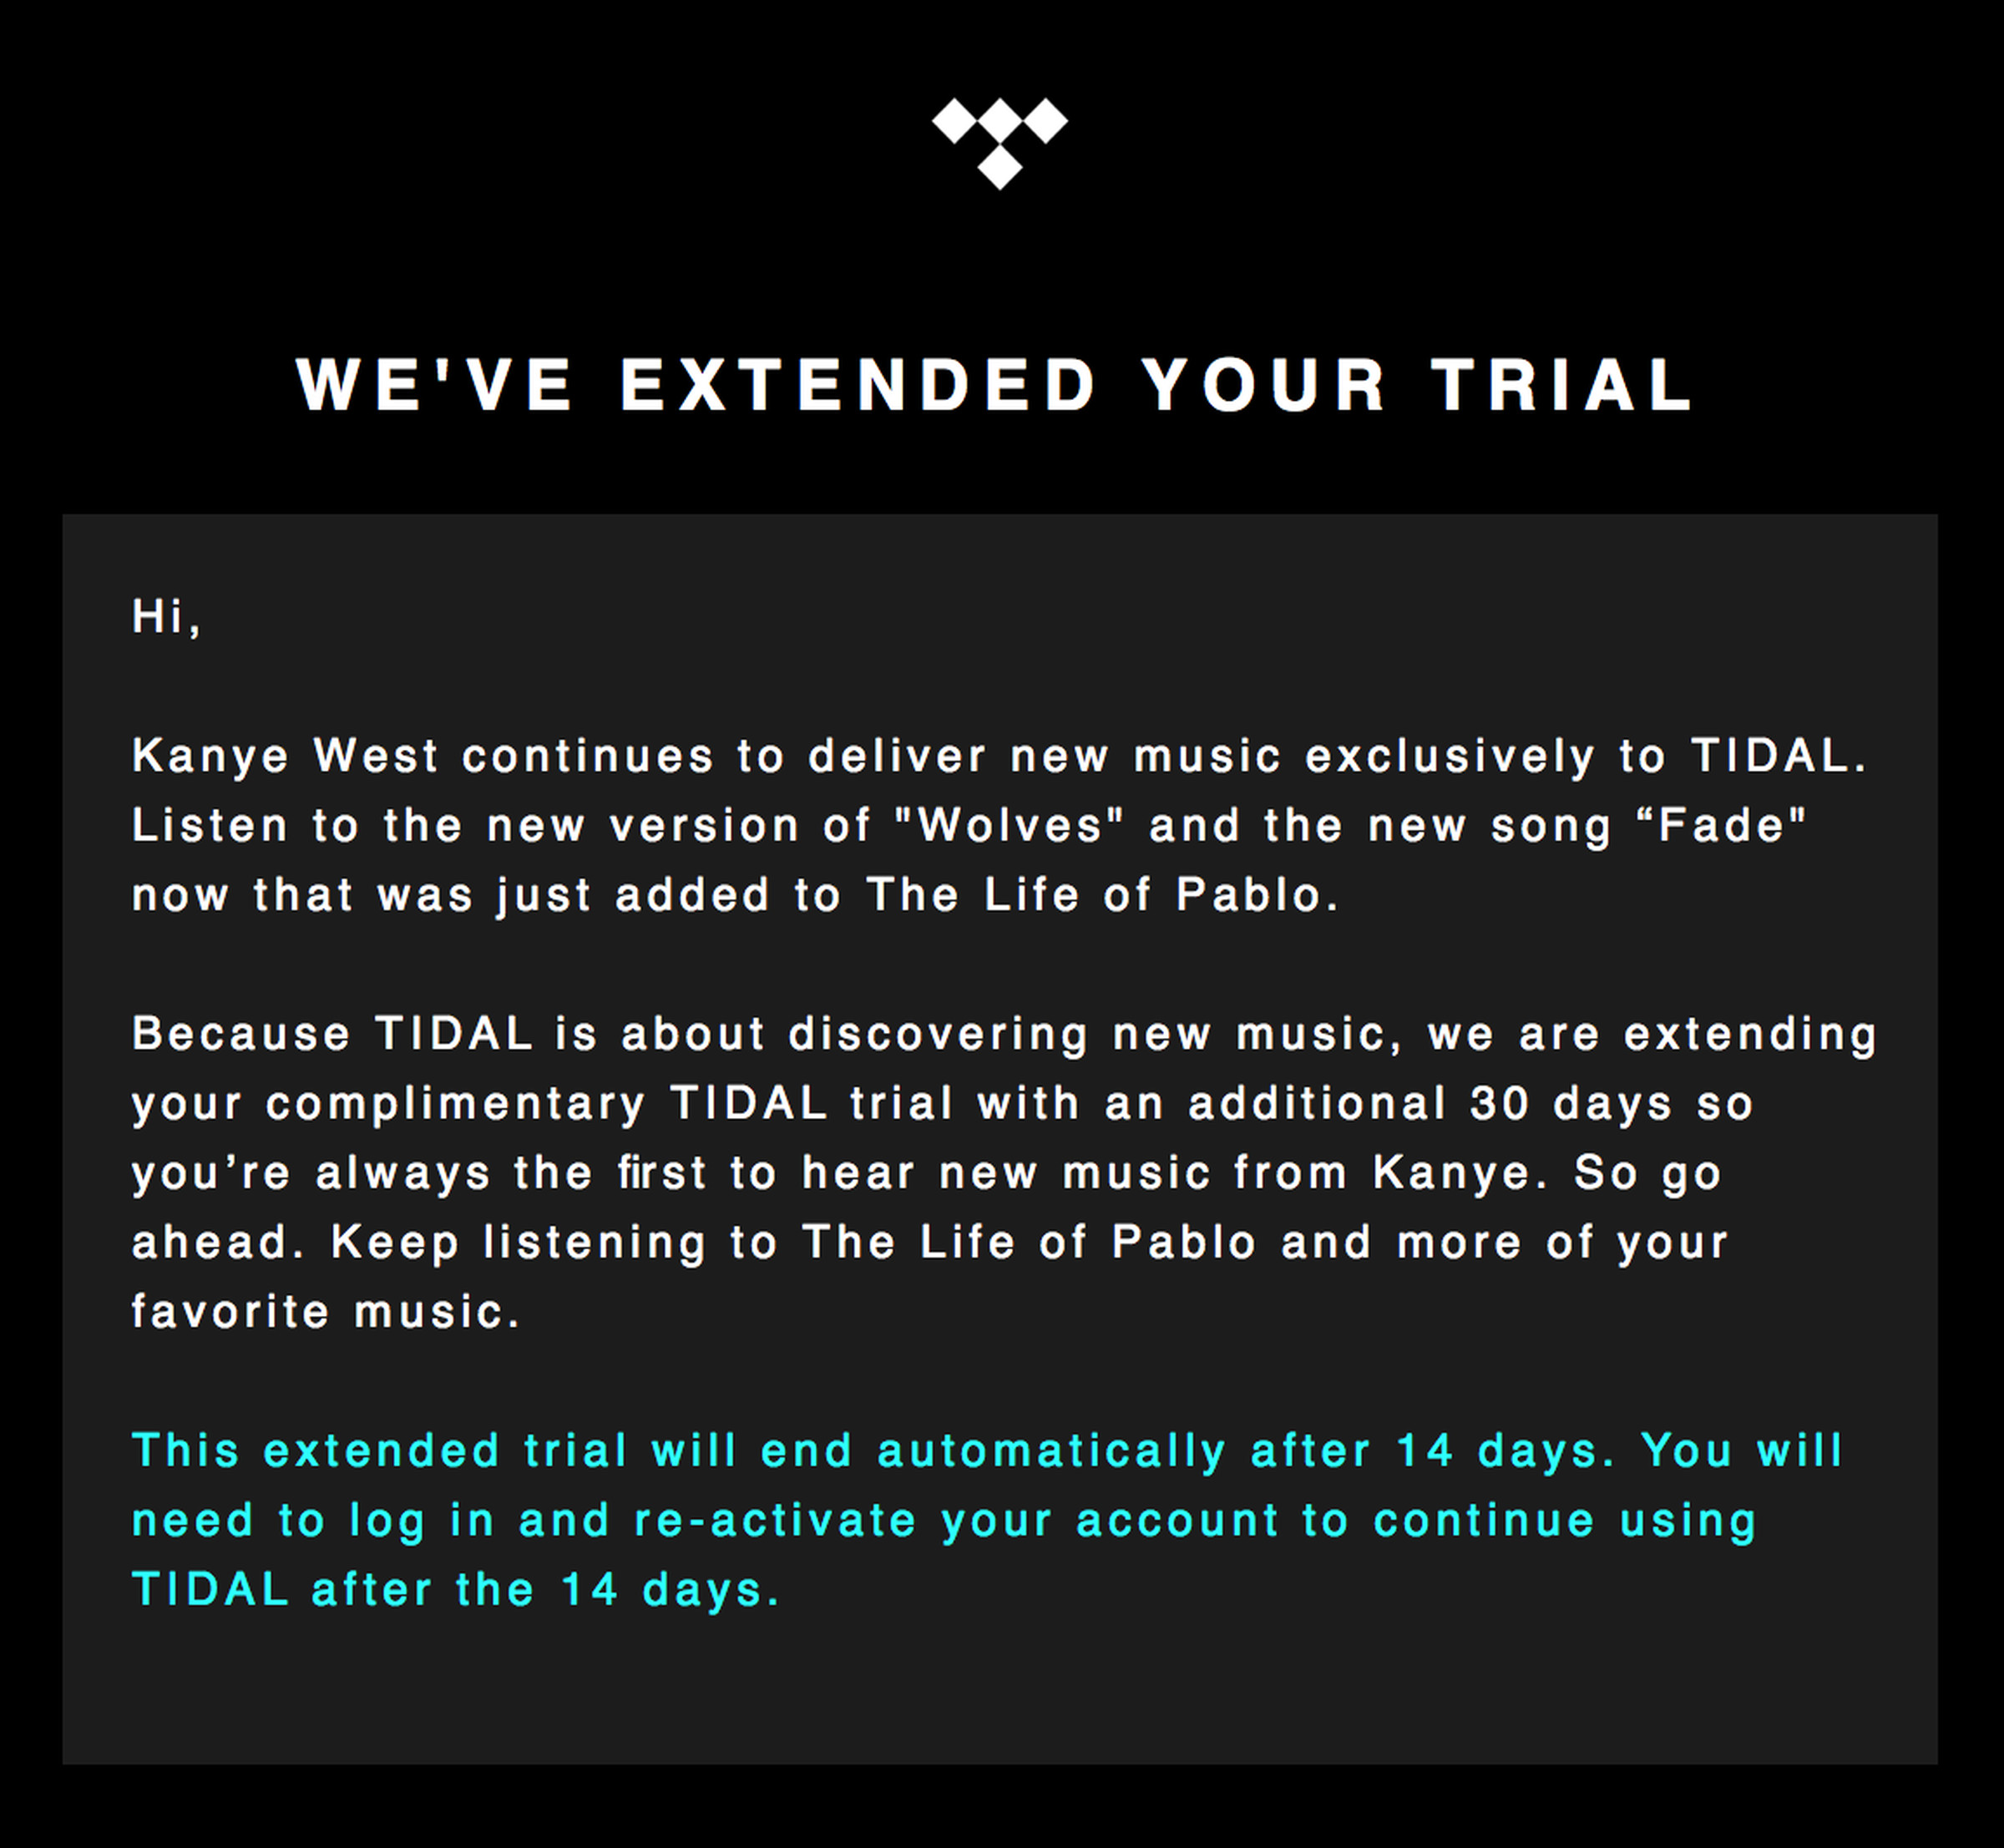 tidal-free-trial-extended-kanye